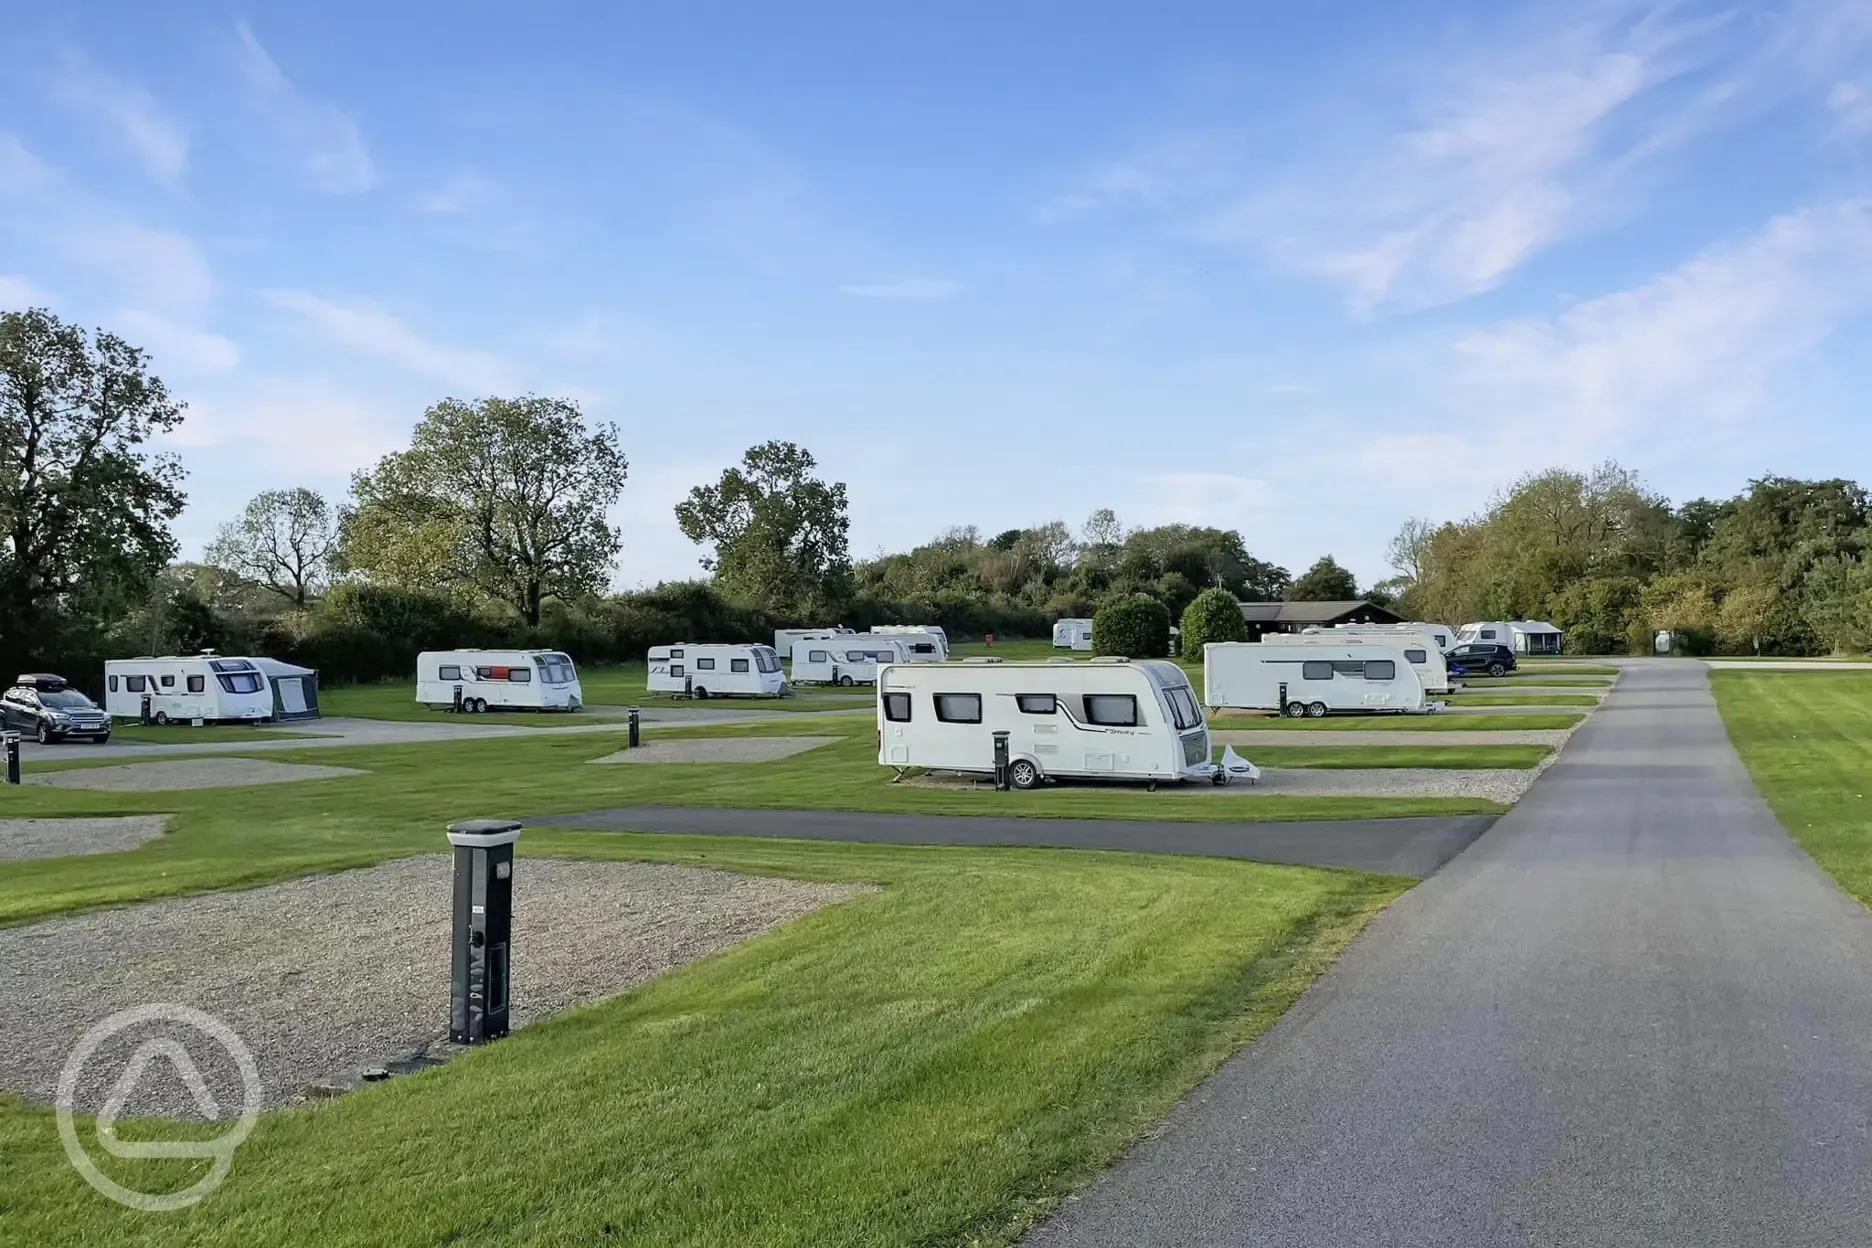 Fully serviced hardstanding super pitches